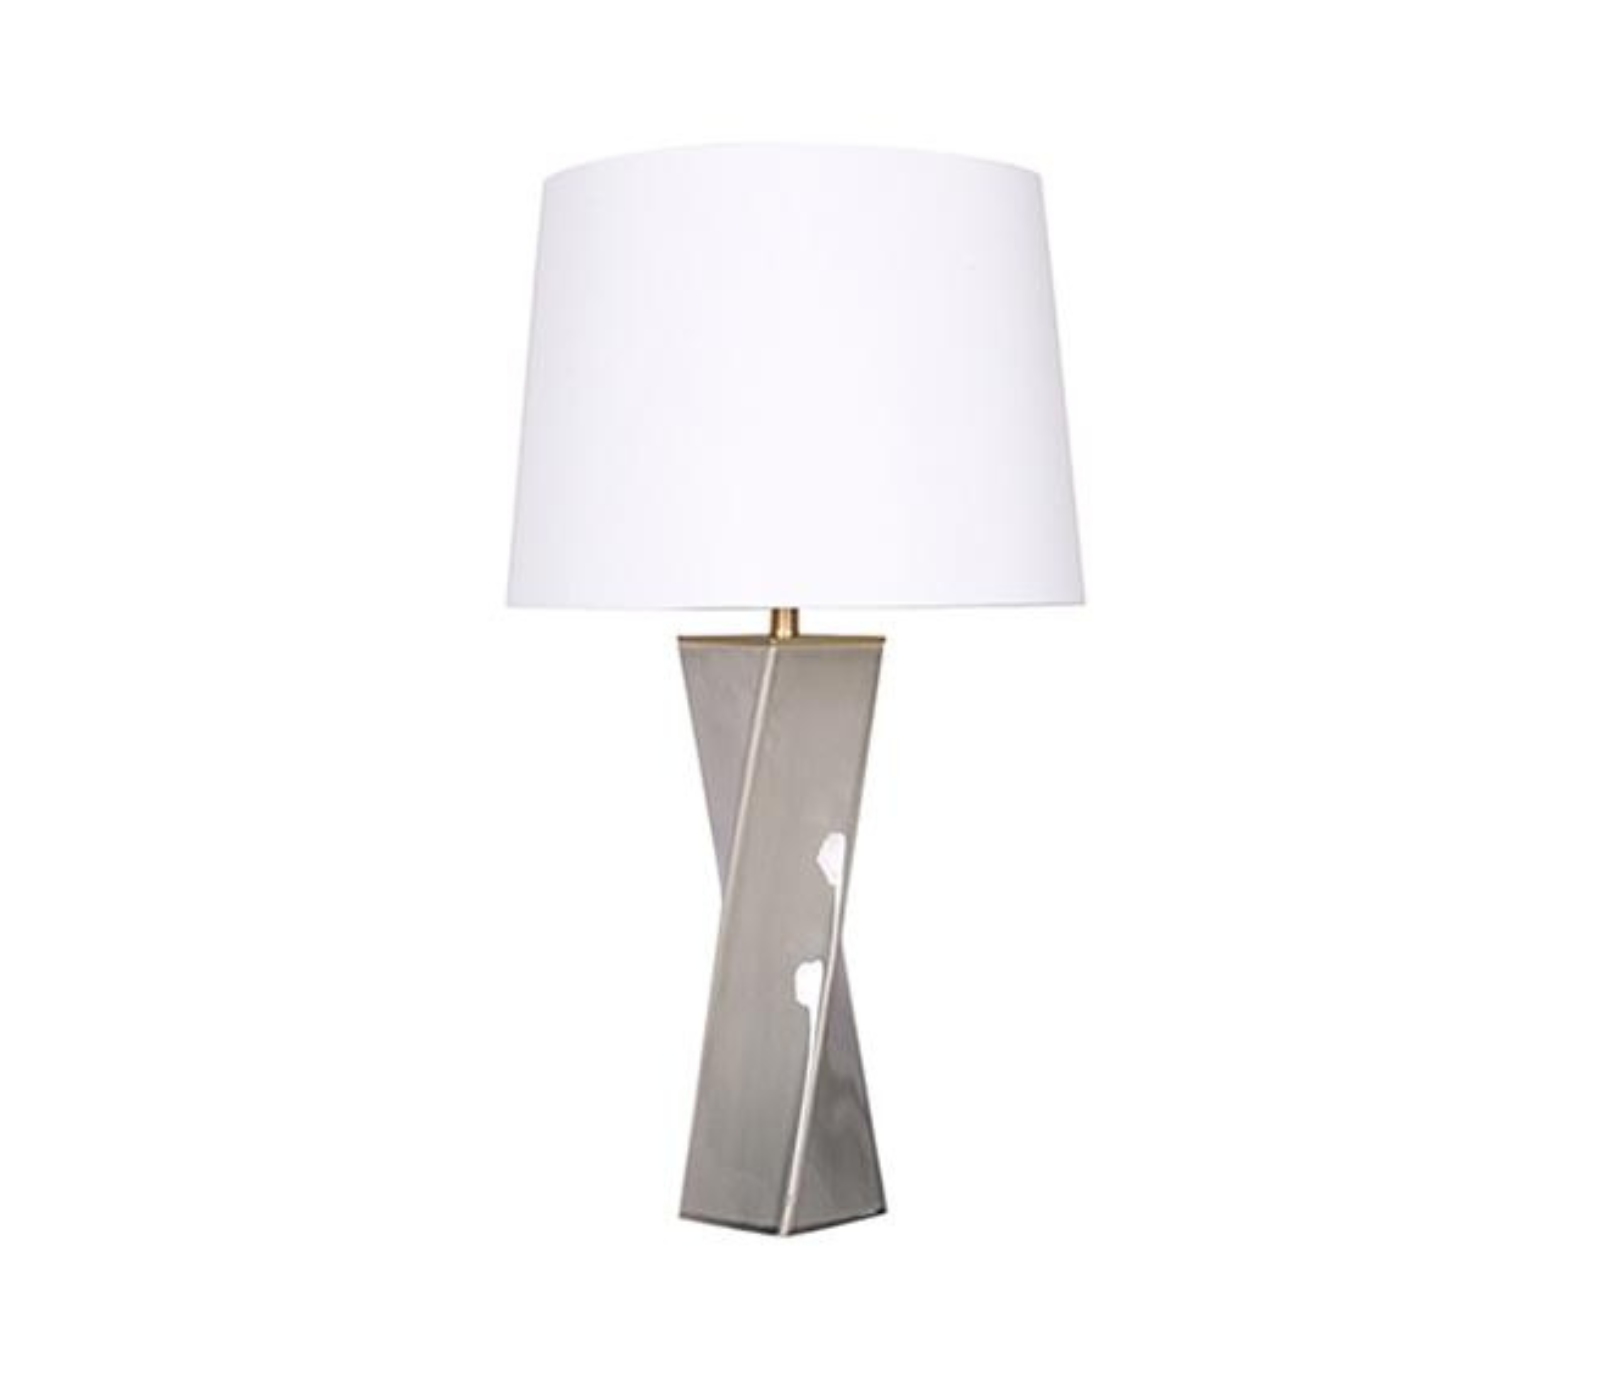 Piper Table Lamp - Antique Grey